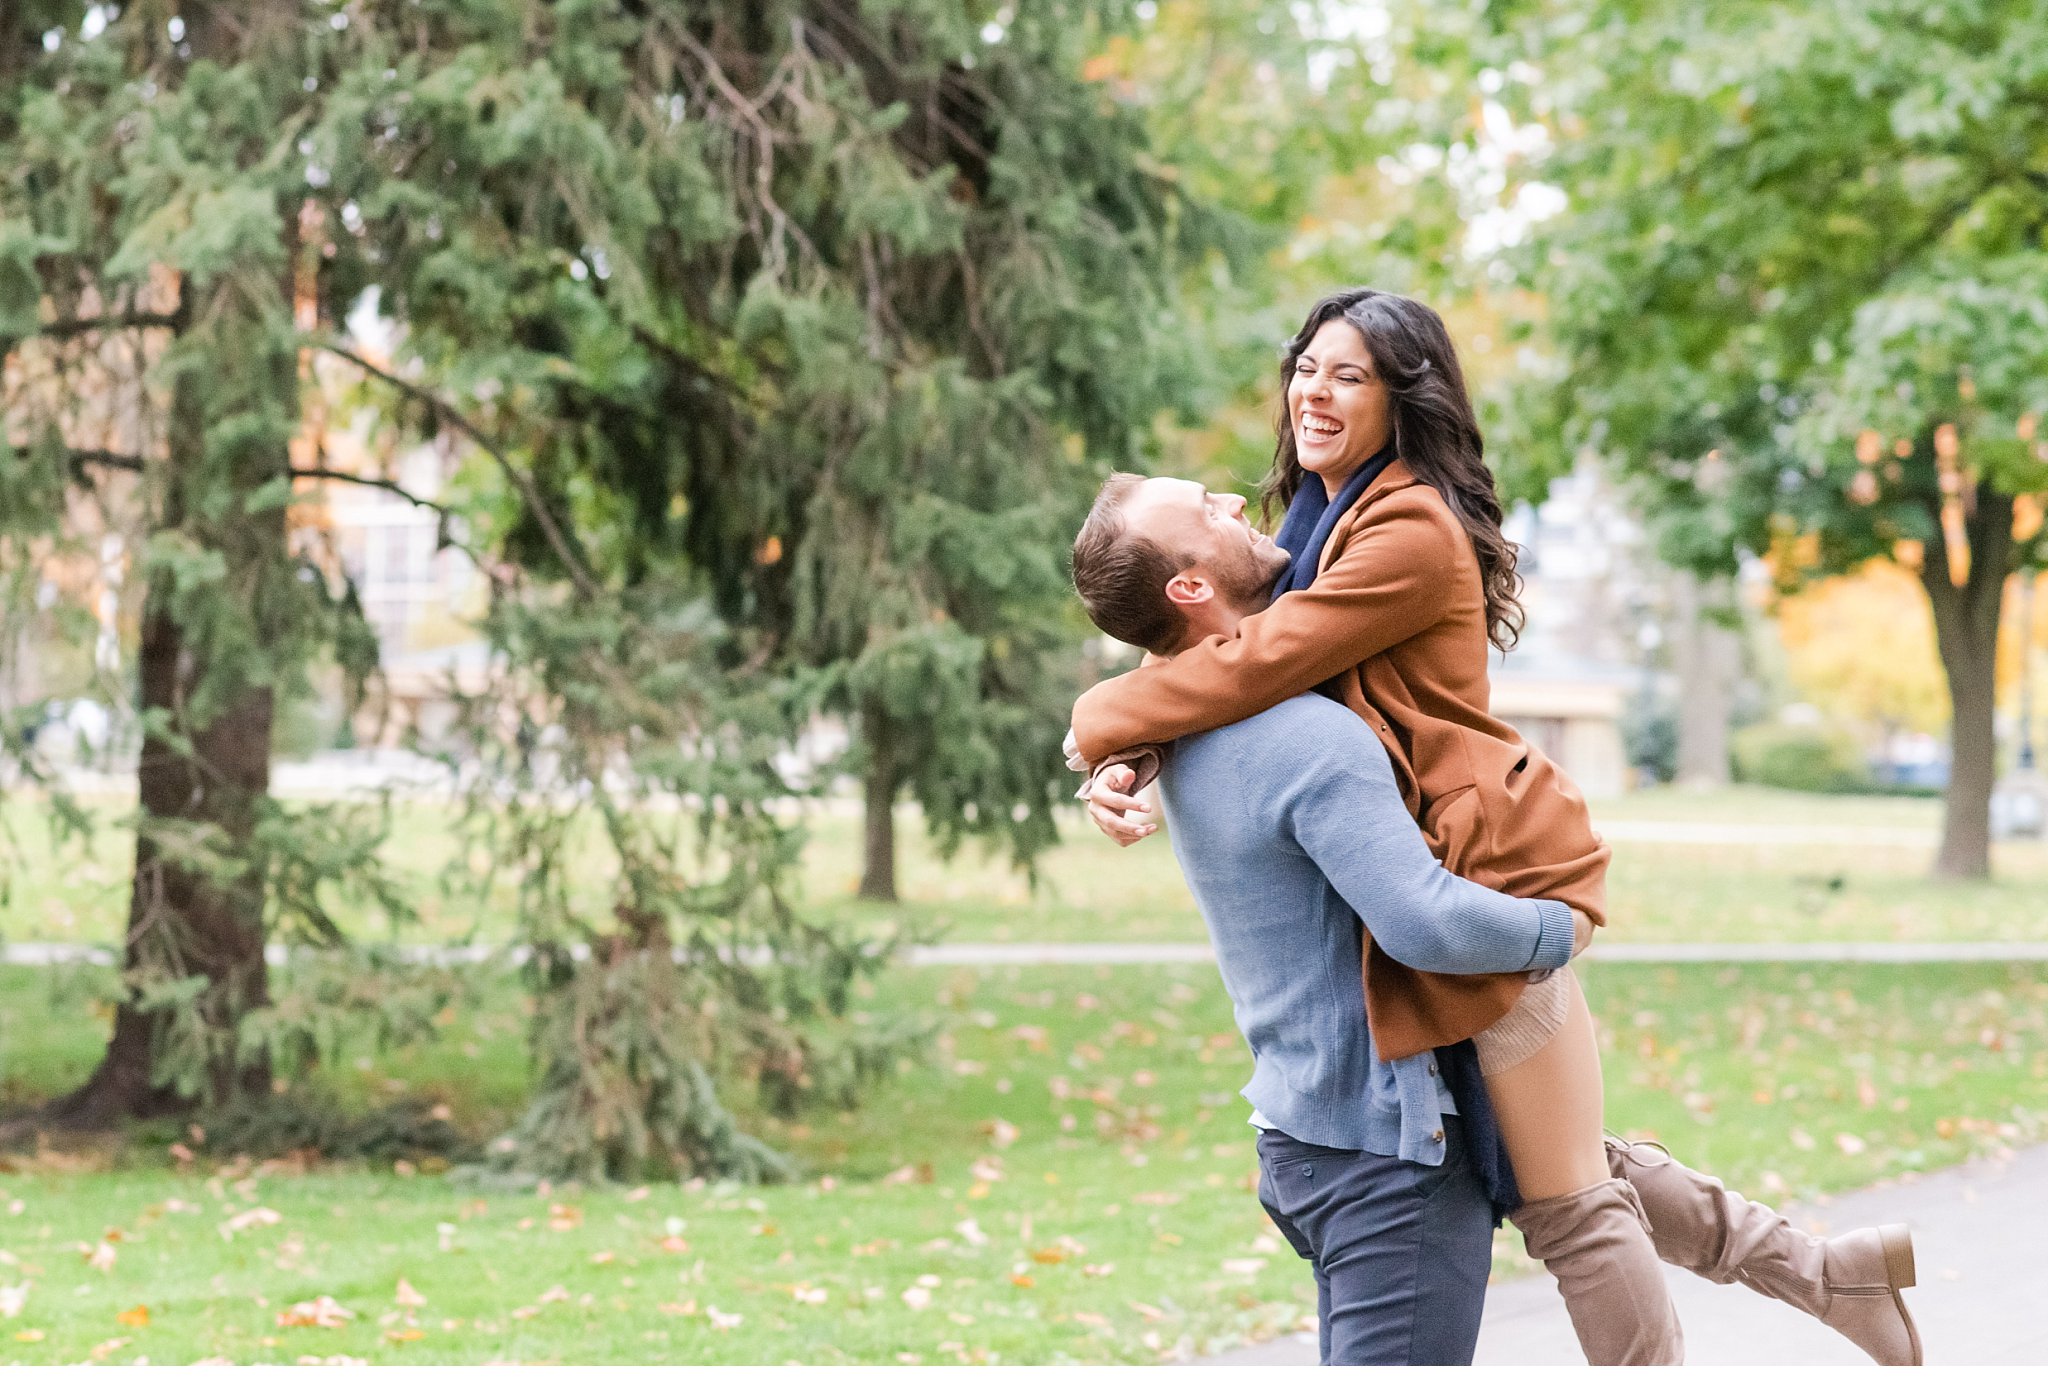 a fall engagement session in downtown london